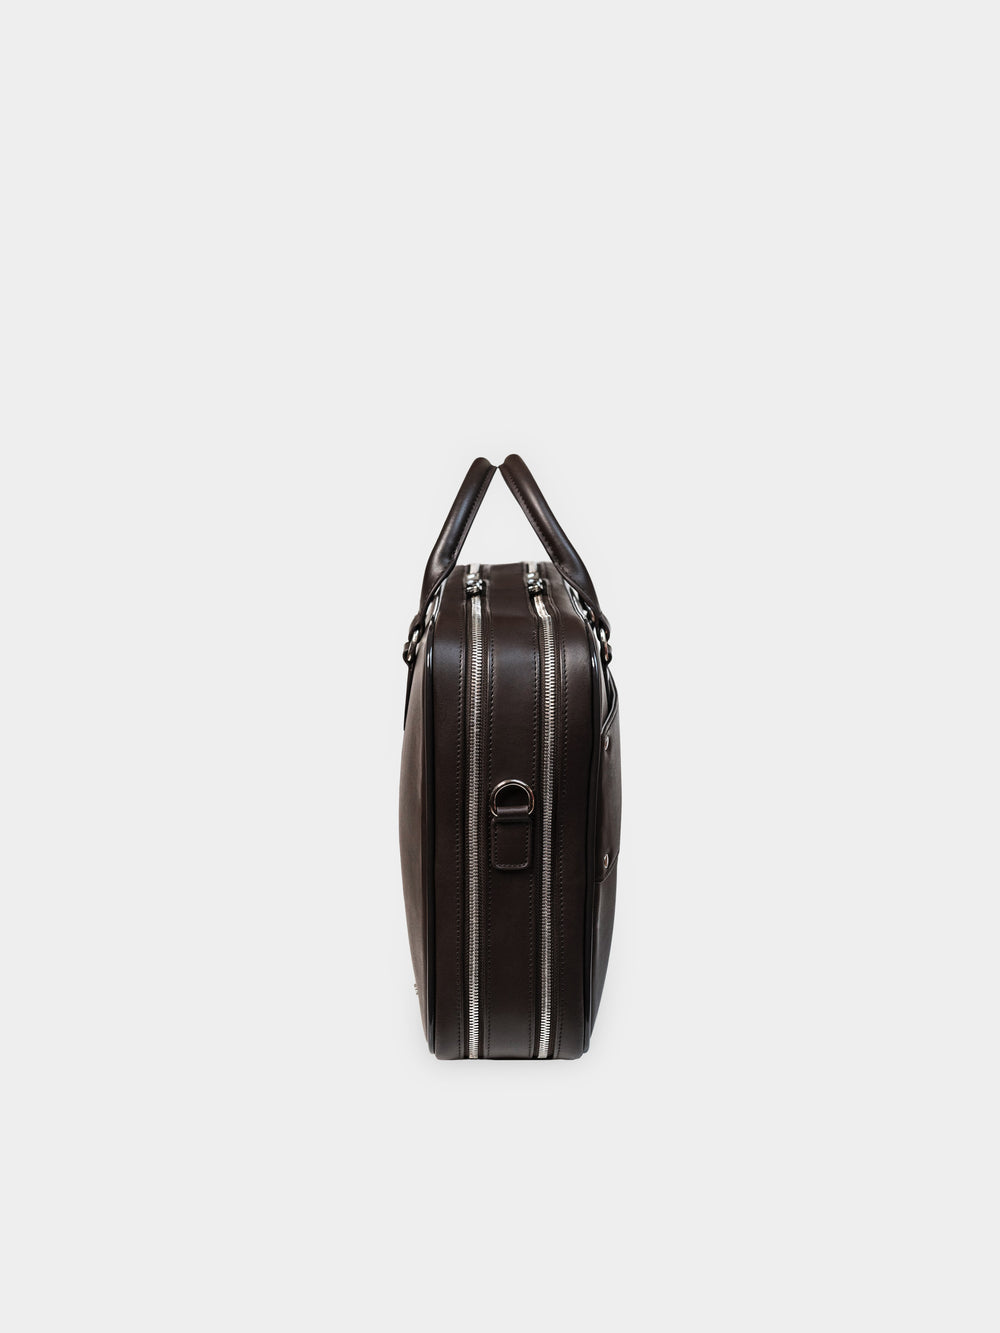 Bags Briefcases Louis Vuitton Backpack